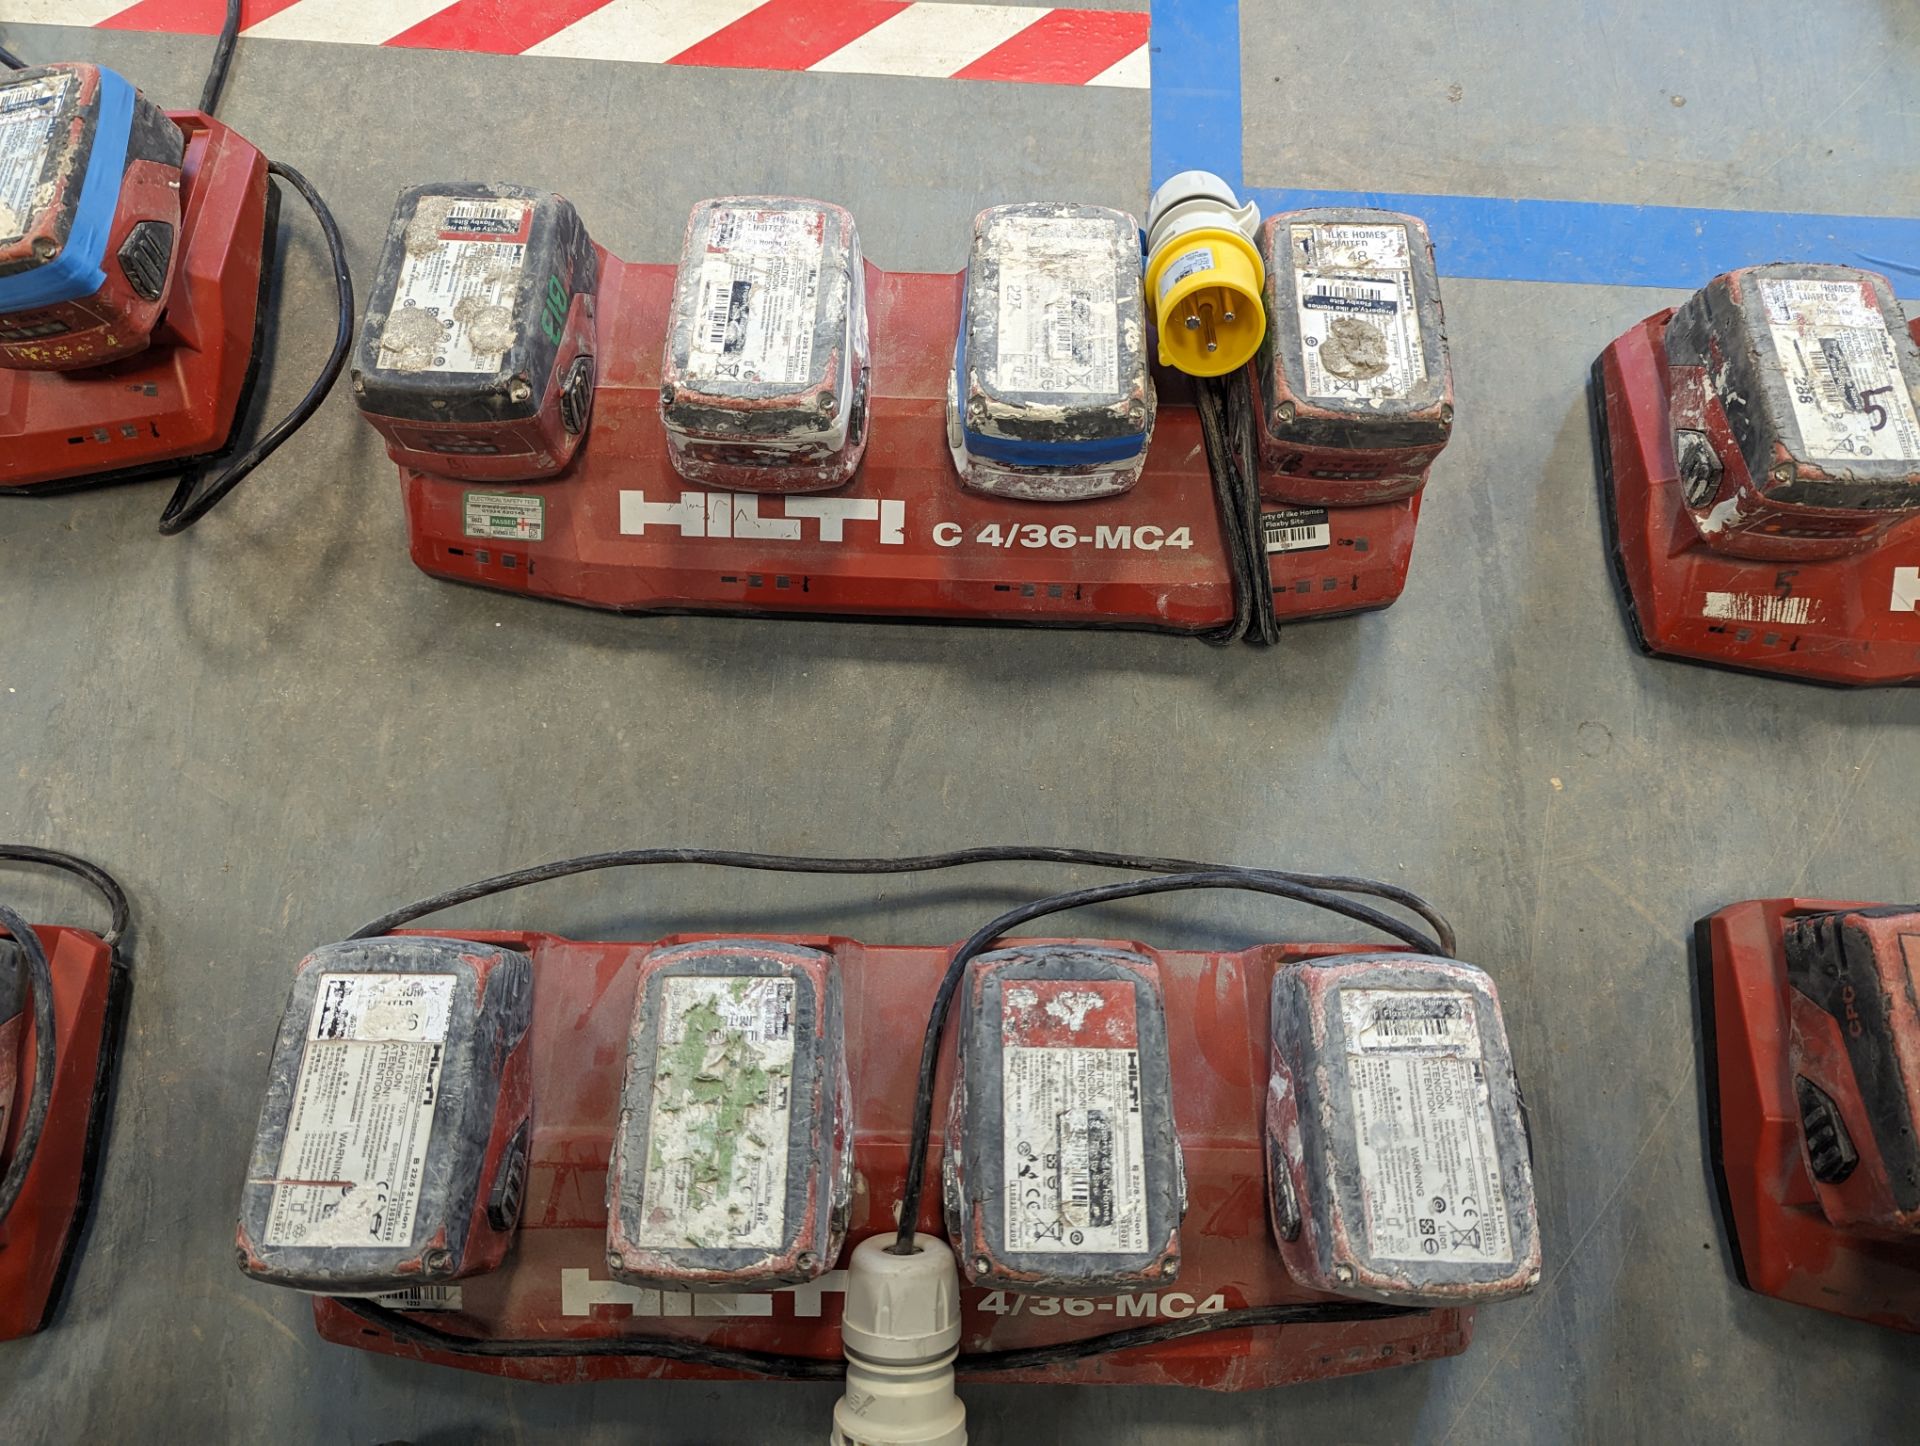 (5) Hilti SF 6H-A22 Cordless Hanner Drills with (2) Hilti C 4/36-MC4 Multi Bay Charger with 4 Batter - Image 5 of 5